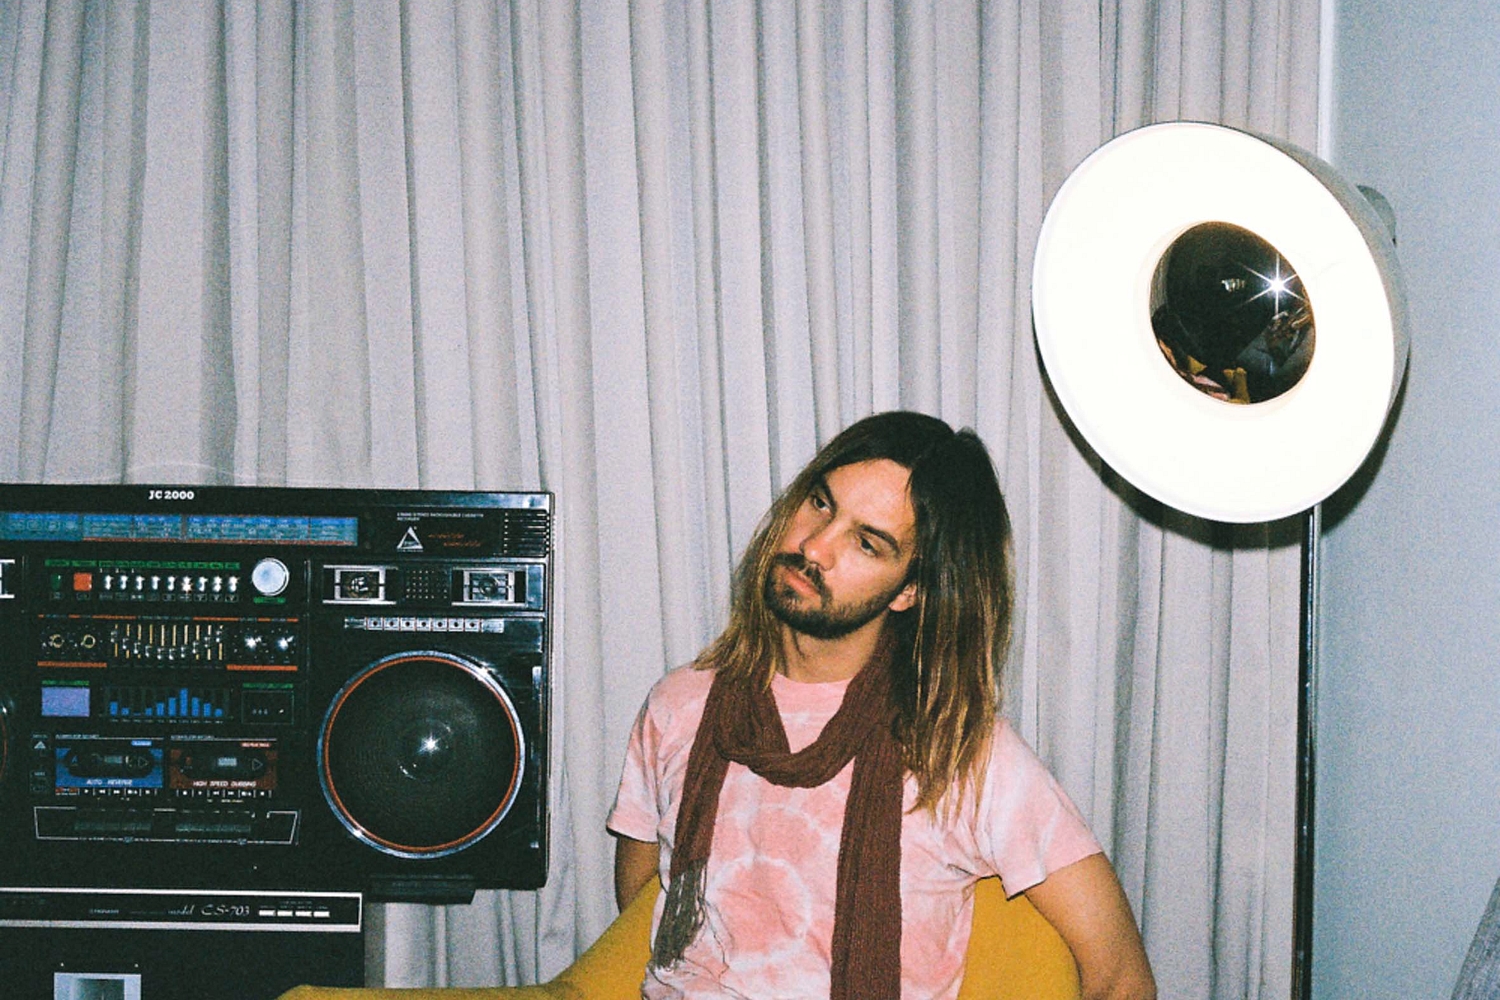 A prog music Official Albums Chart exist, and Tame Impala are number one